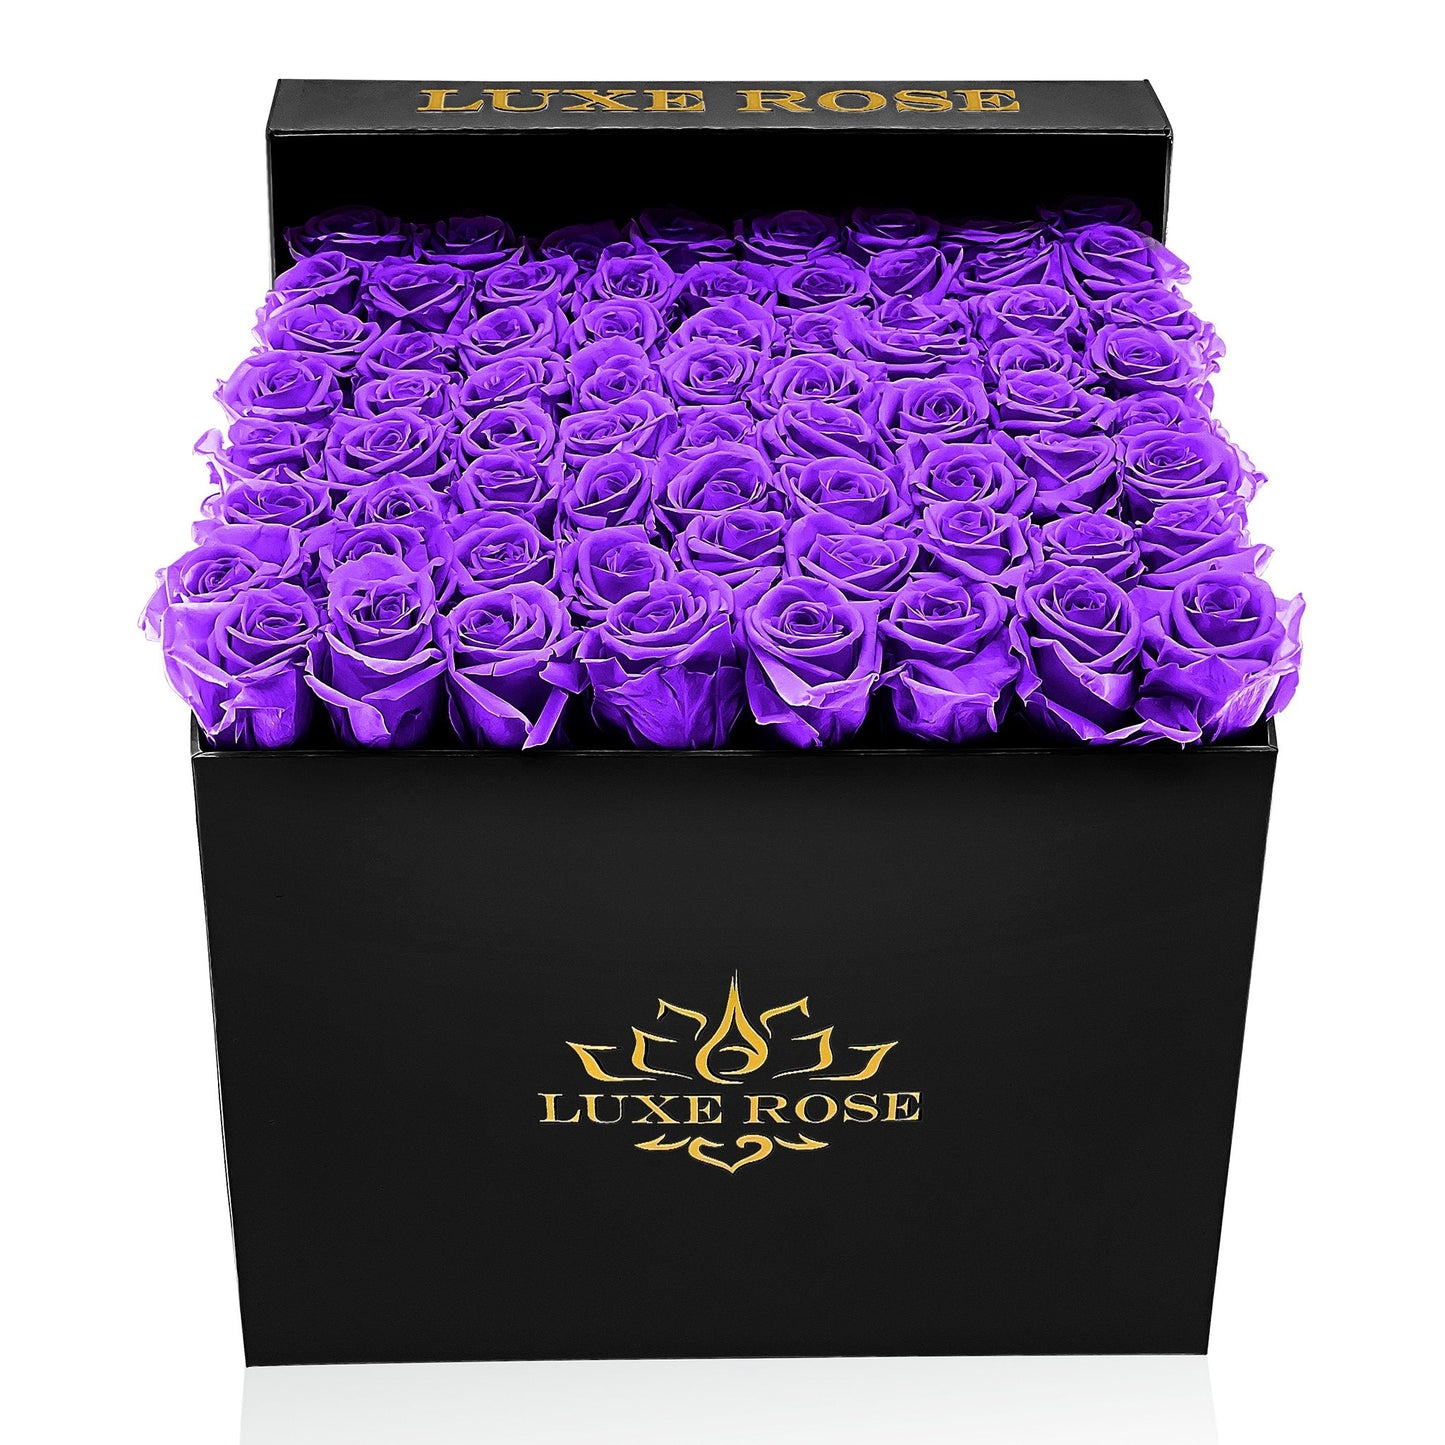 Preserved Roses Large Box | Purple - Floral_Arrangement - Flower Delivery NYC